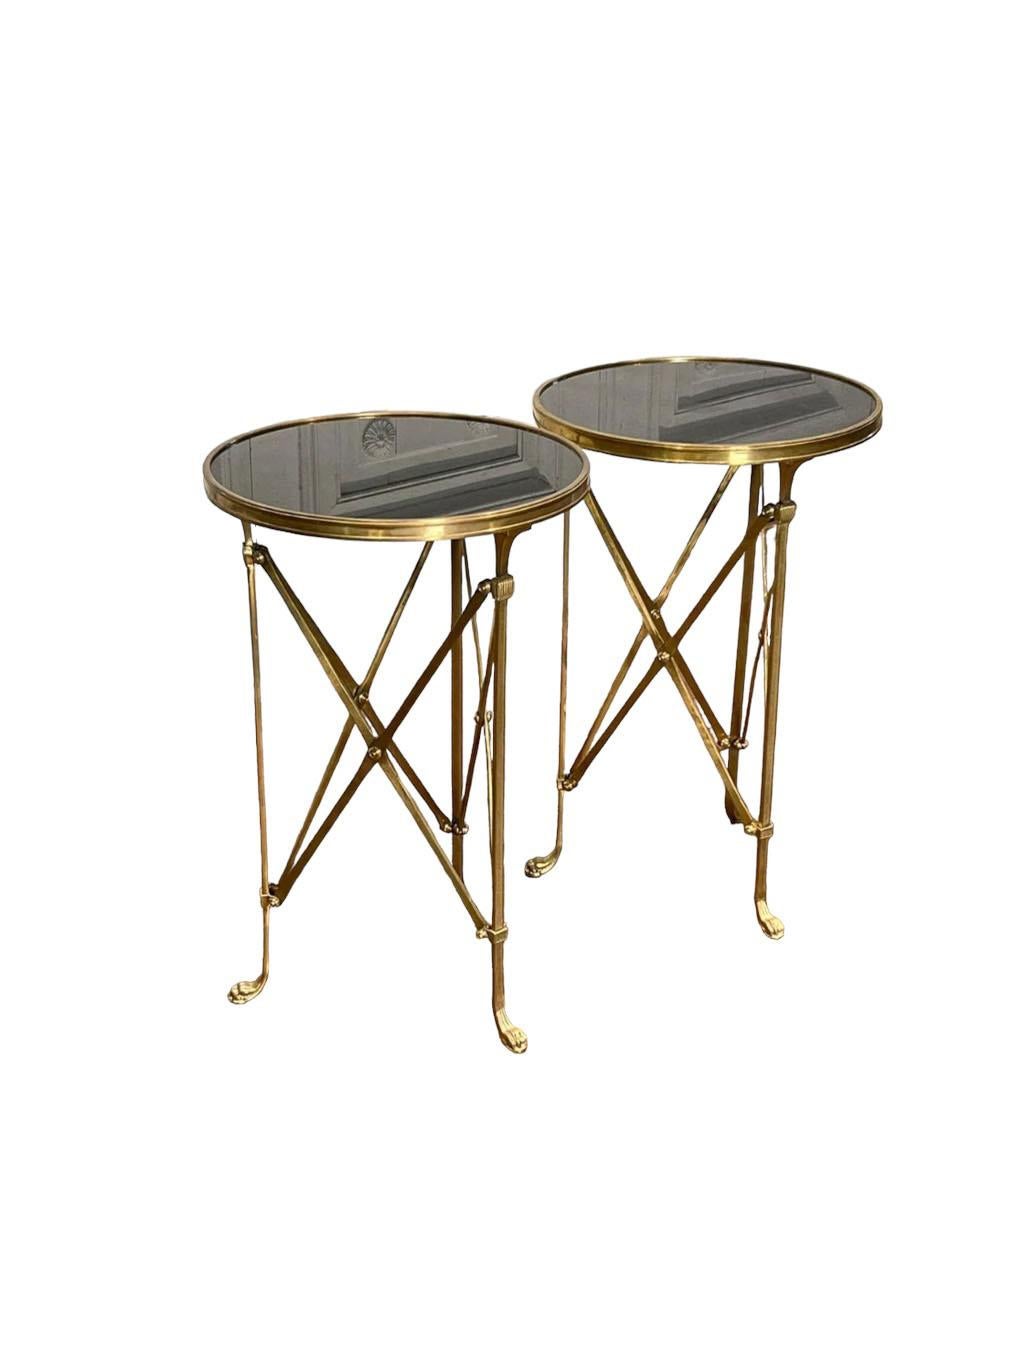 Contemporary Empire Style Gueridon Tables  For Sale